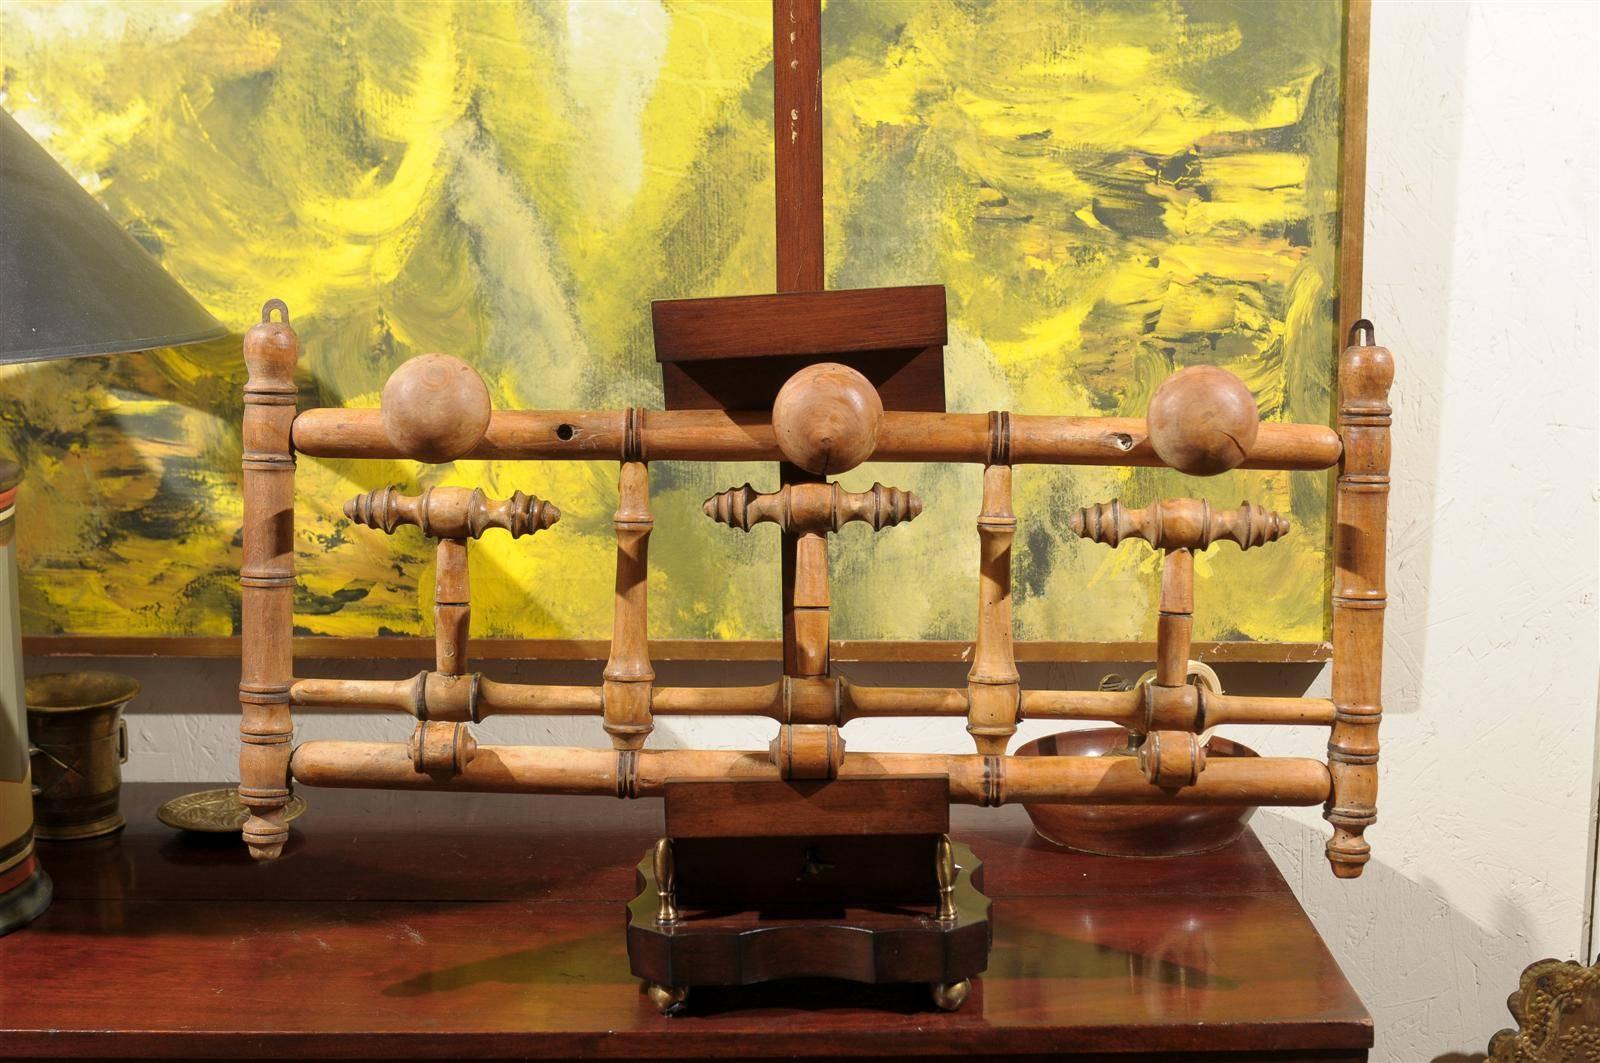 19th century French wall mounting coat or hat rack of turned pine with three fixed upper knobs and three lower knobs that can be pulled down for additional storage.